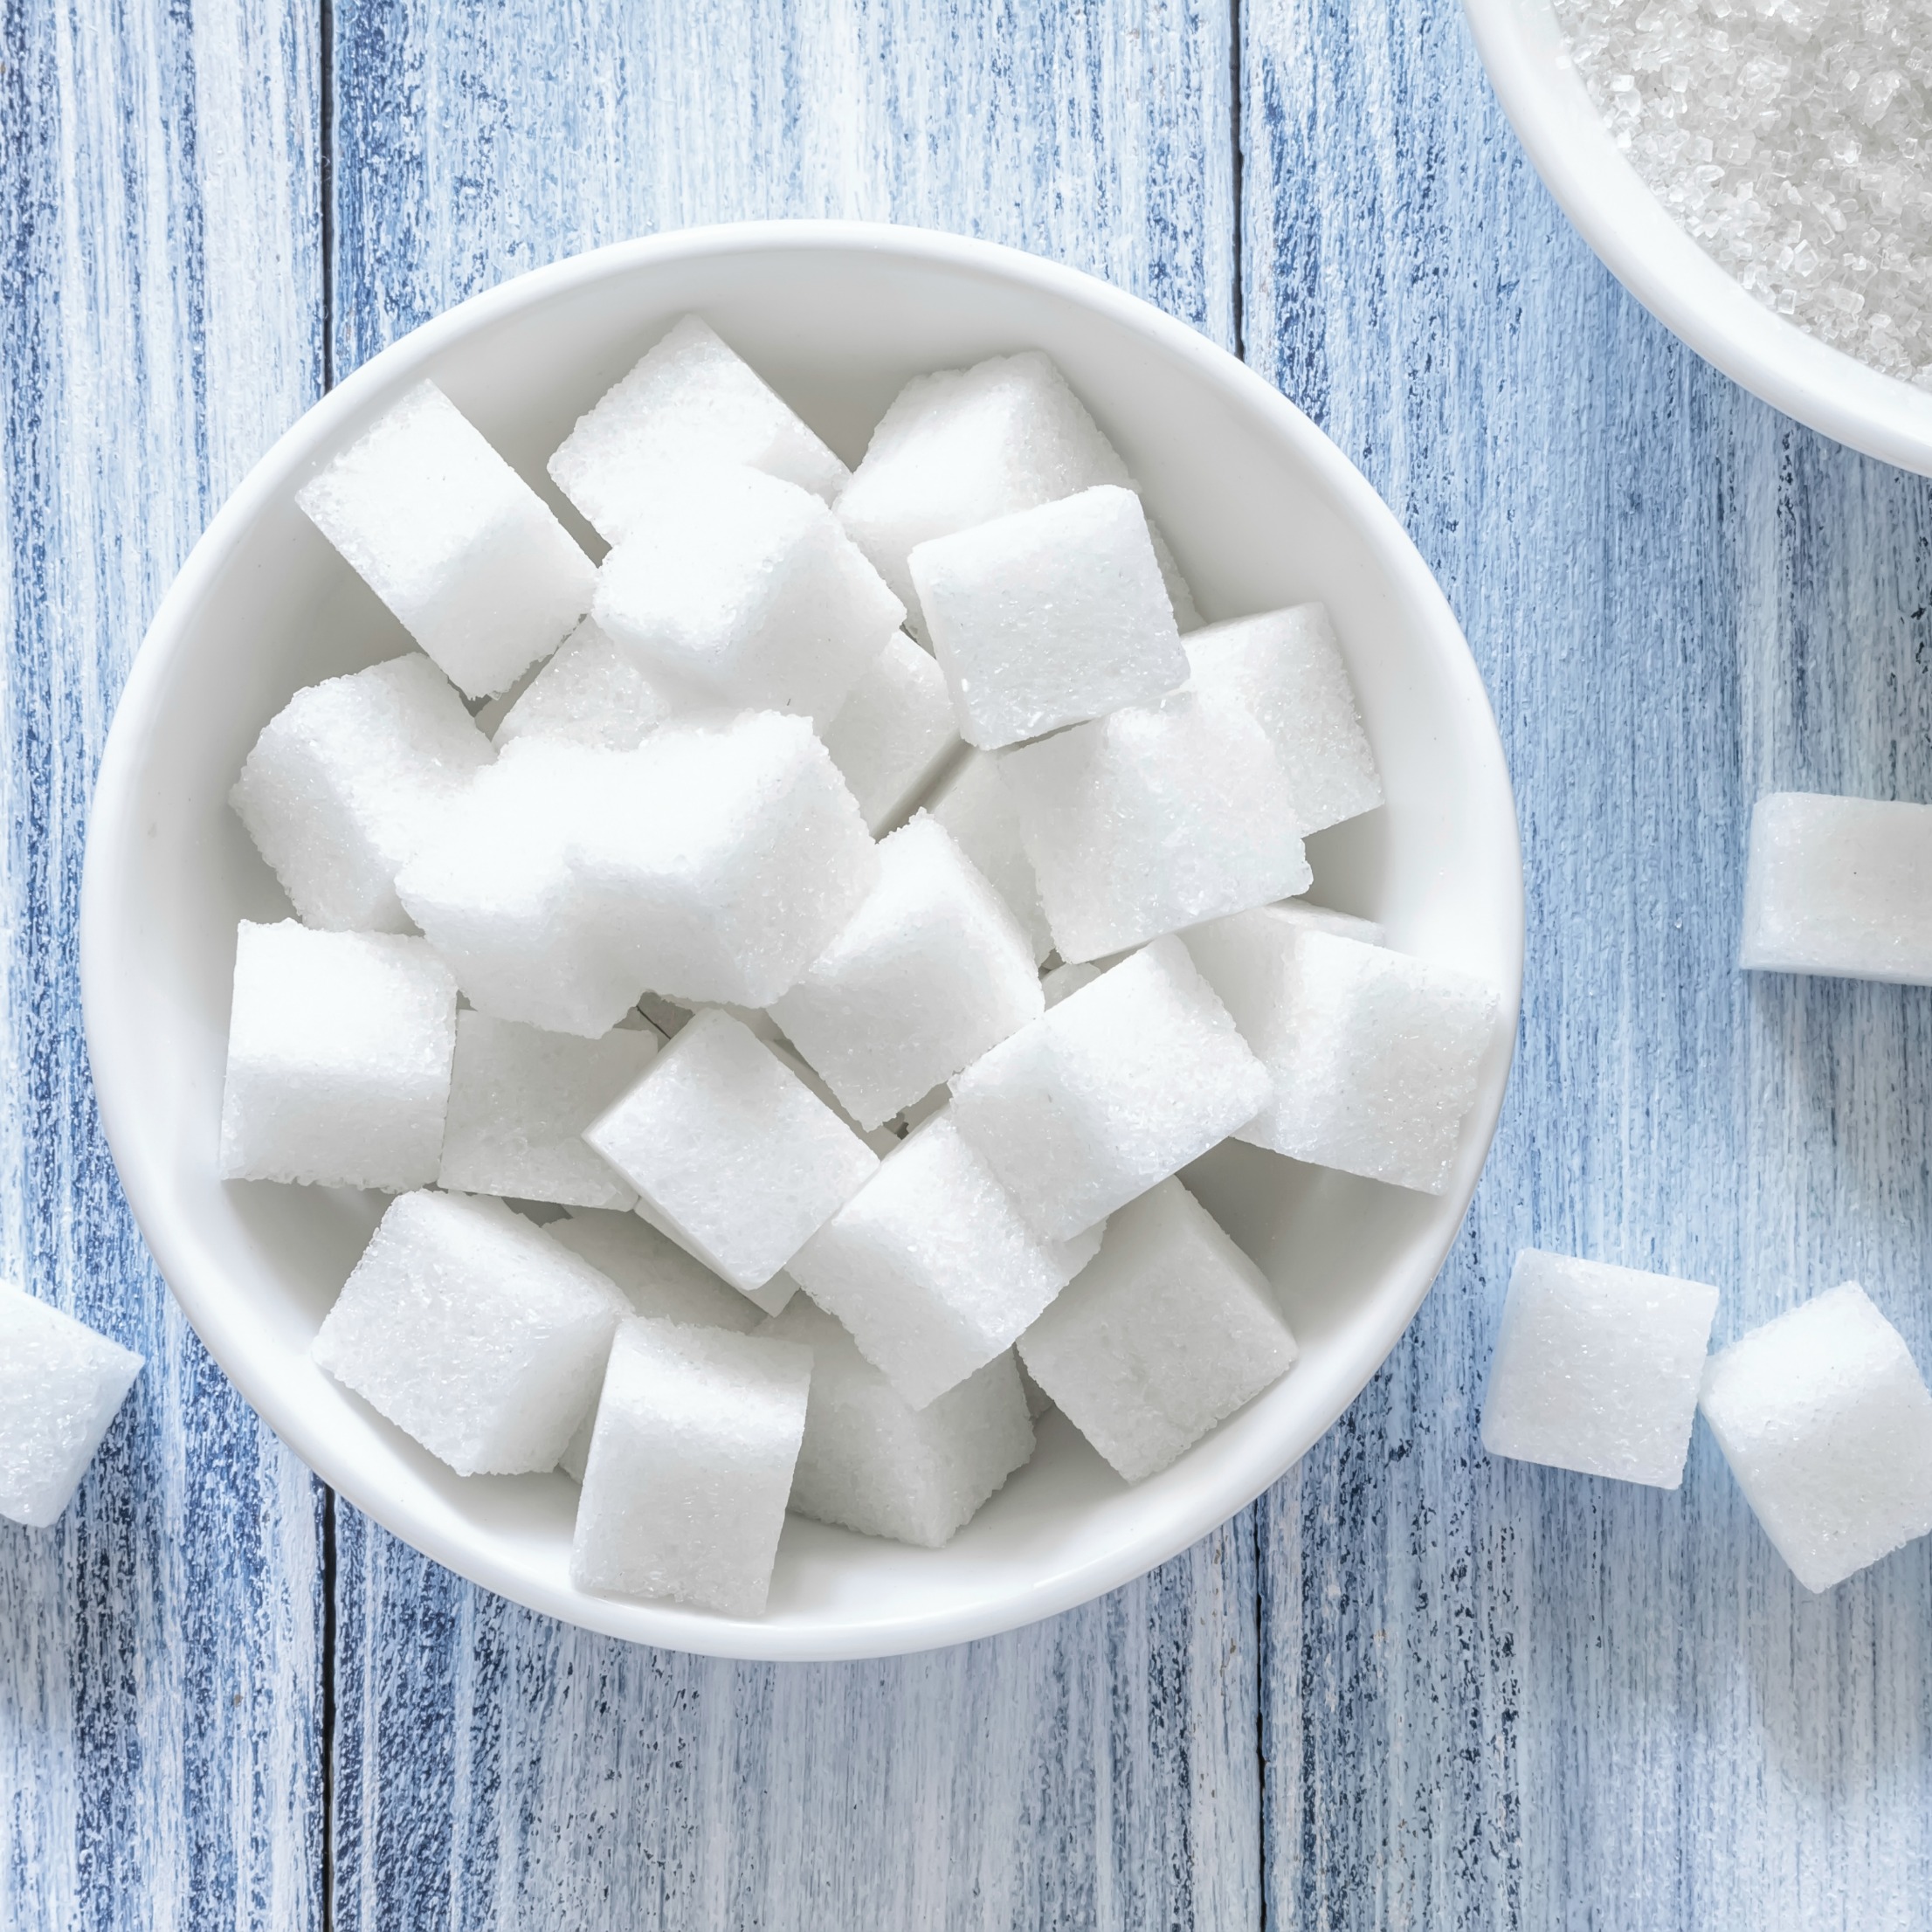 Healthy Habits: All About Sugar